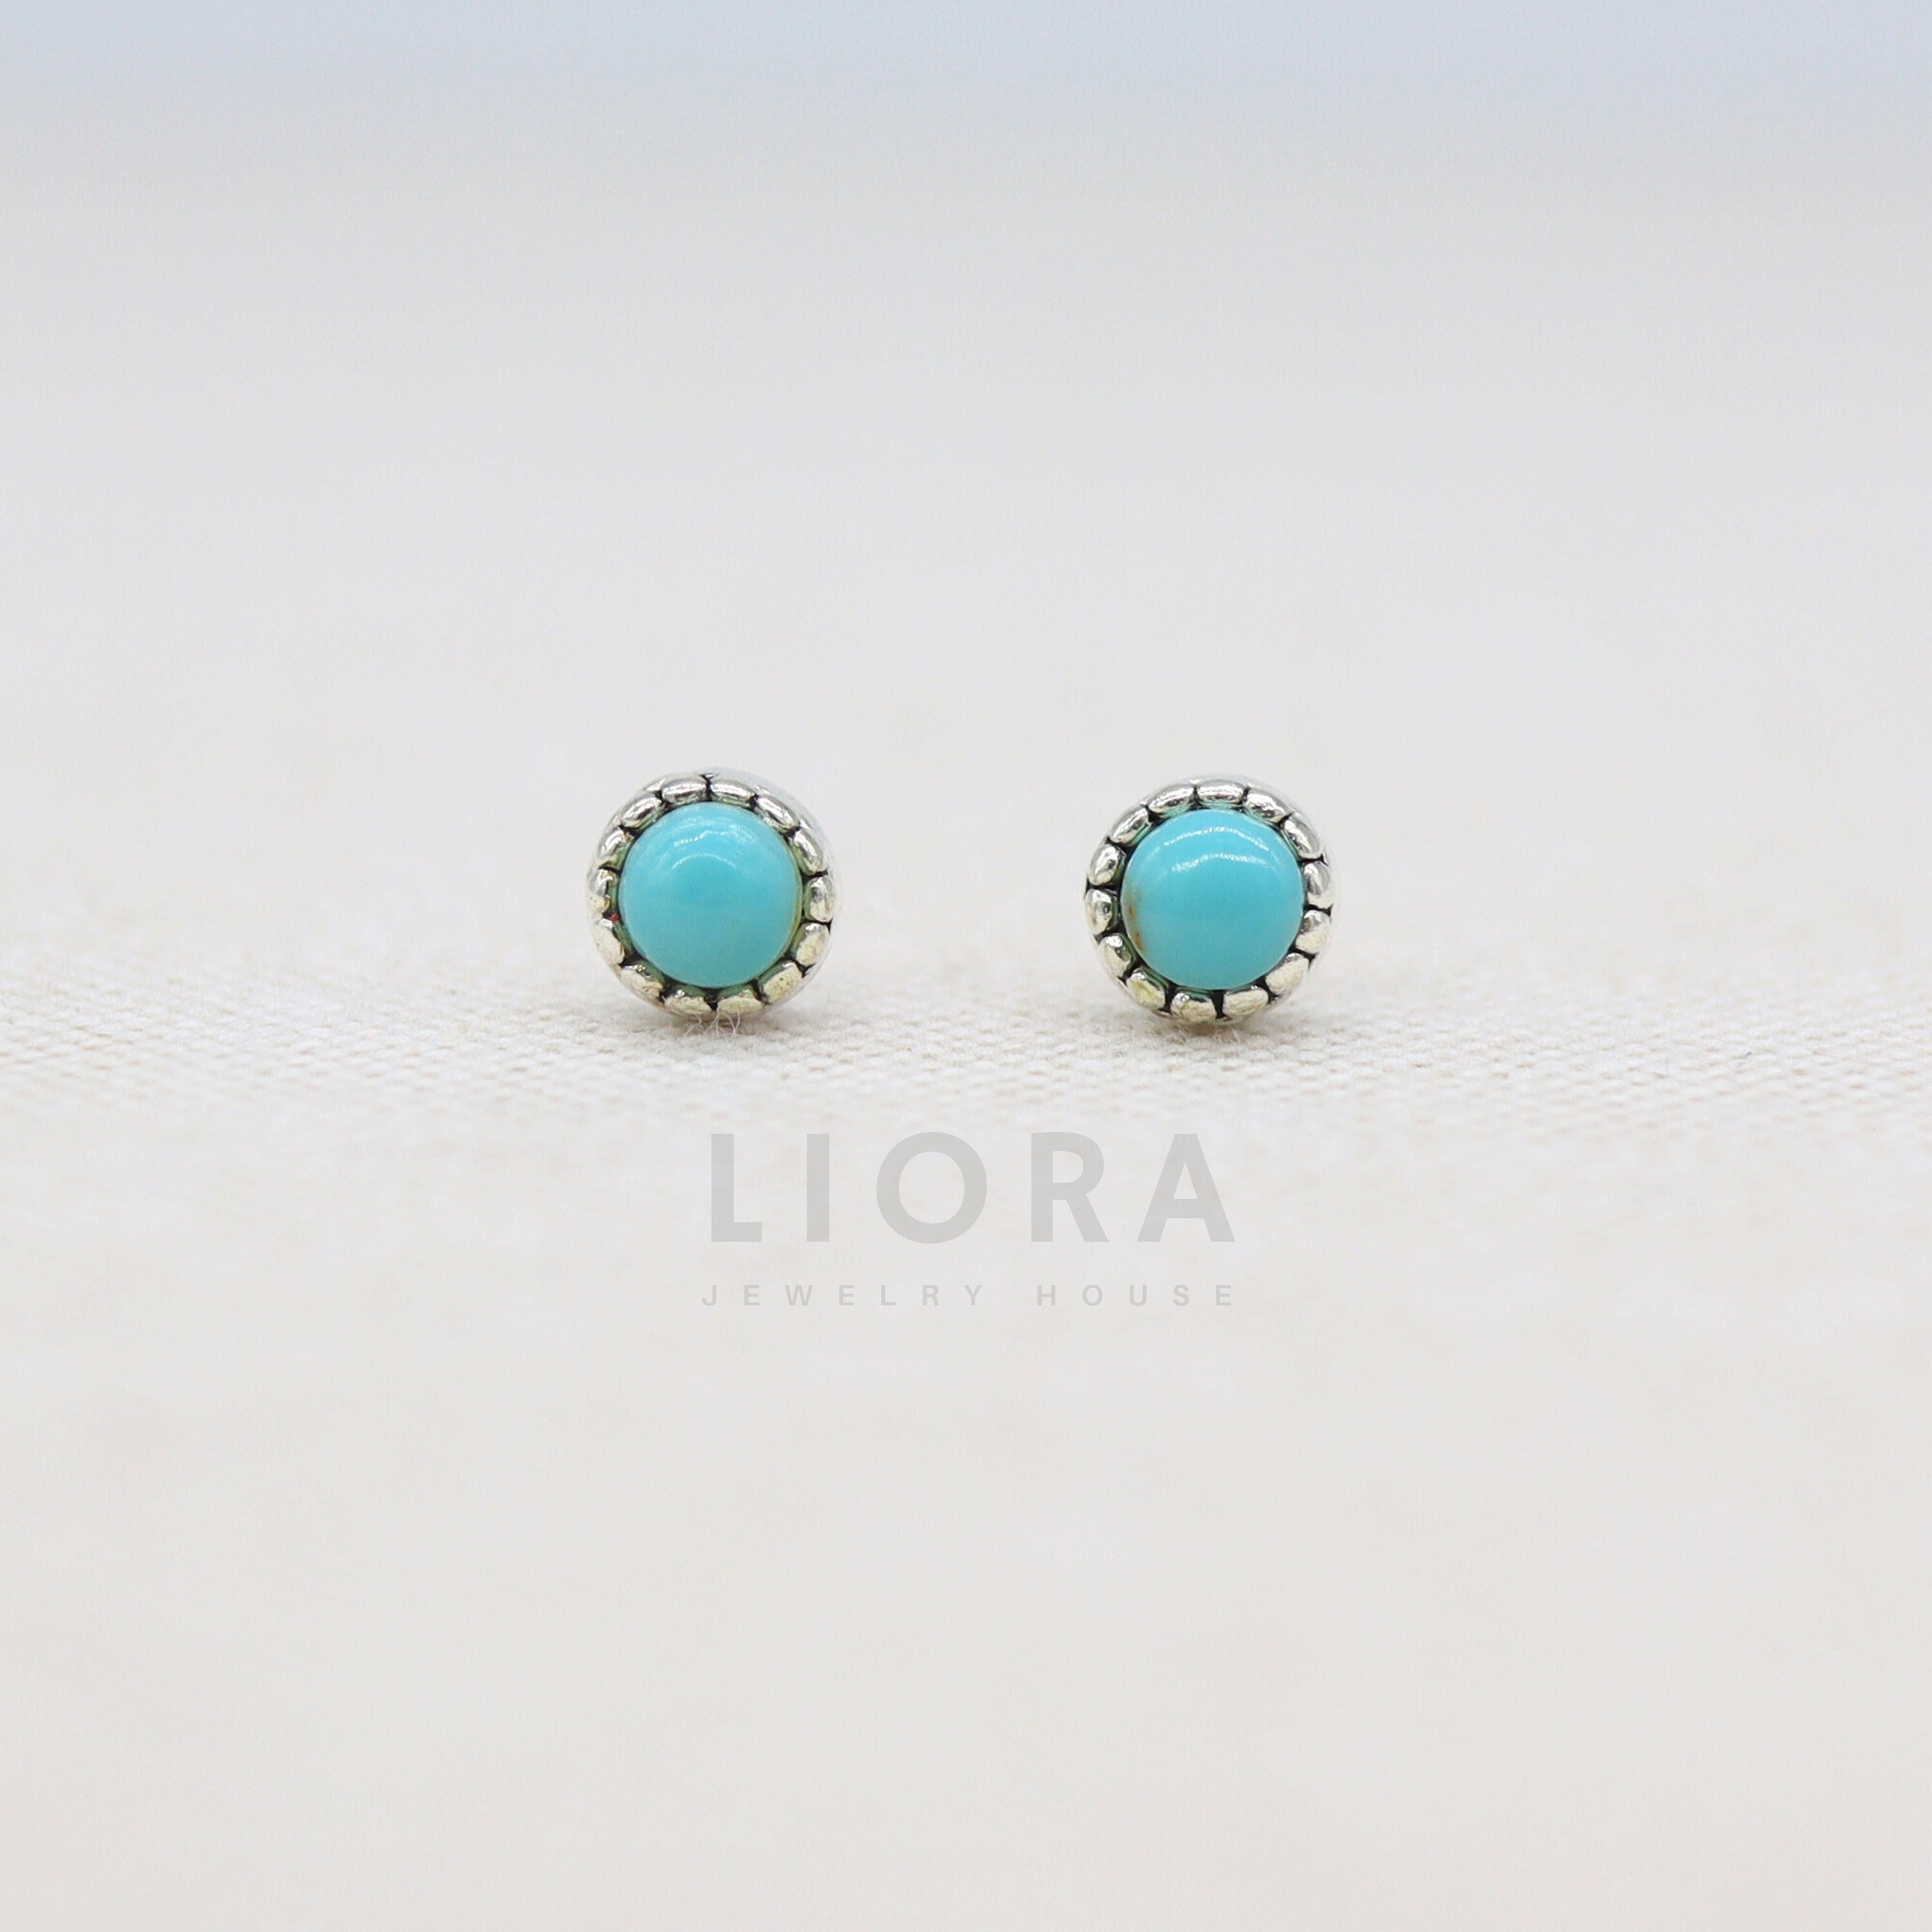 Amazon.com: 925 Sterling Silver 6mm Round Reconstructed Turquoise Gemstone  Stud Earrings - Small Classic Circle Studs | Handmade by MiYa Jewelry  Creations : Handmade Products